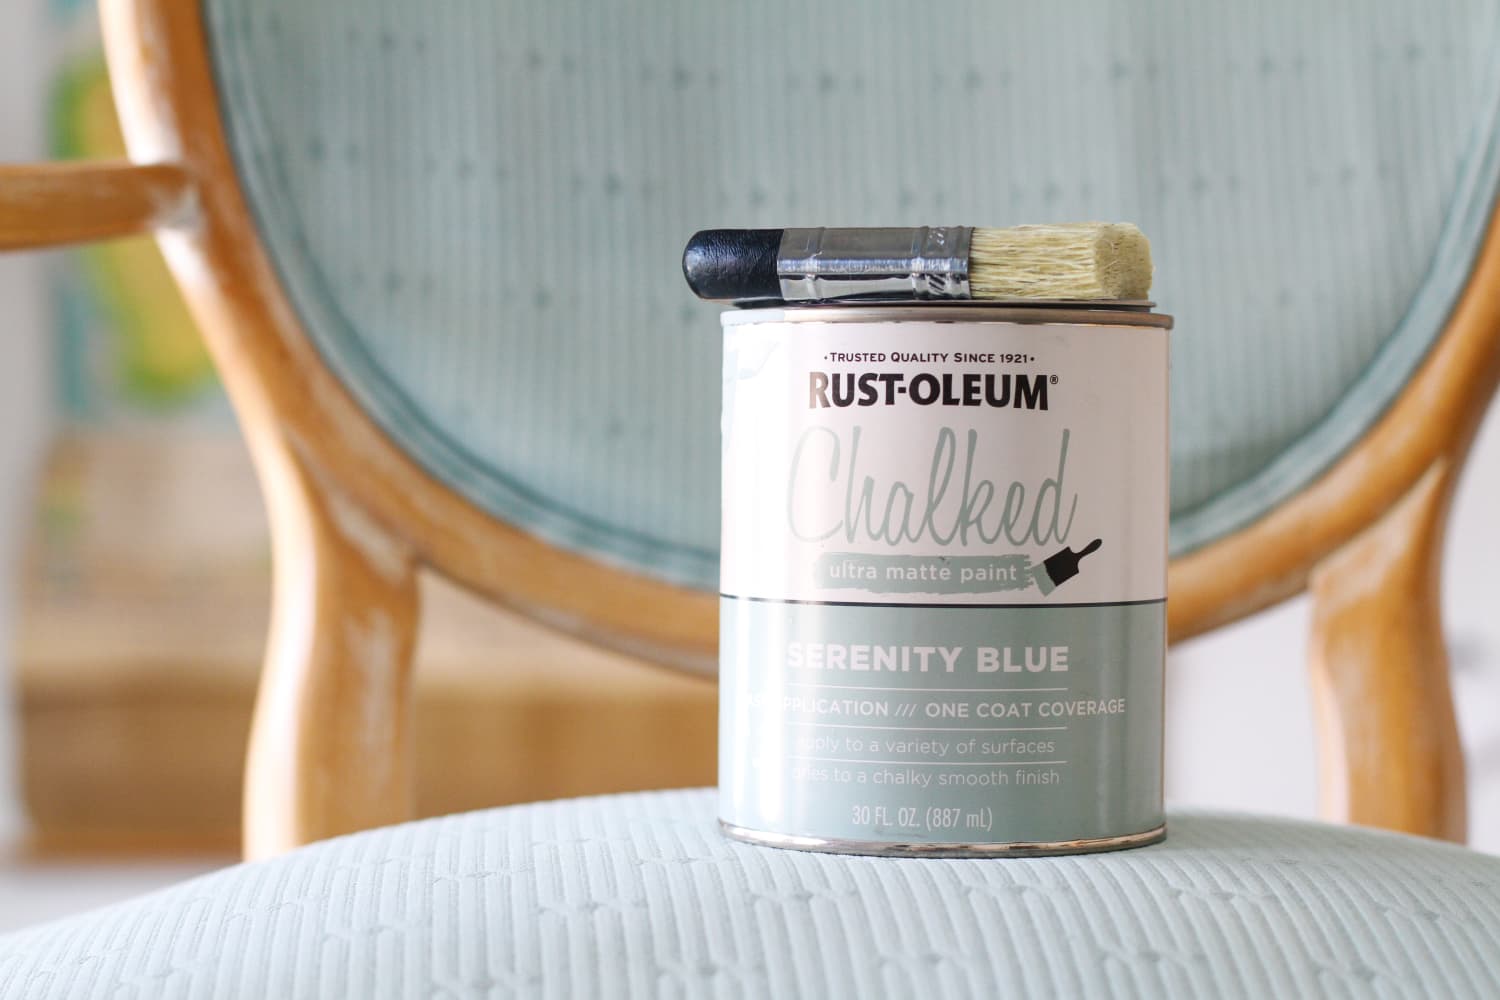 Upholstery Paint for a Variety of Uses